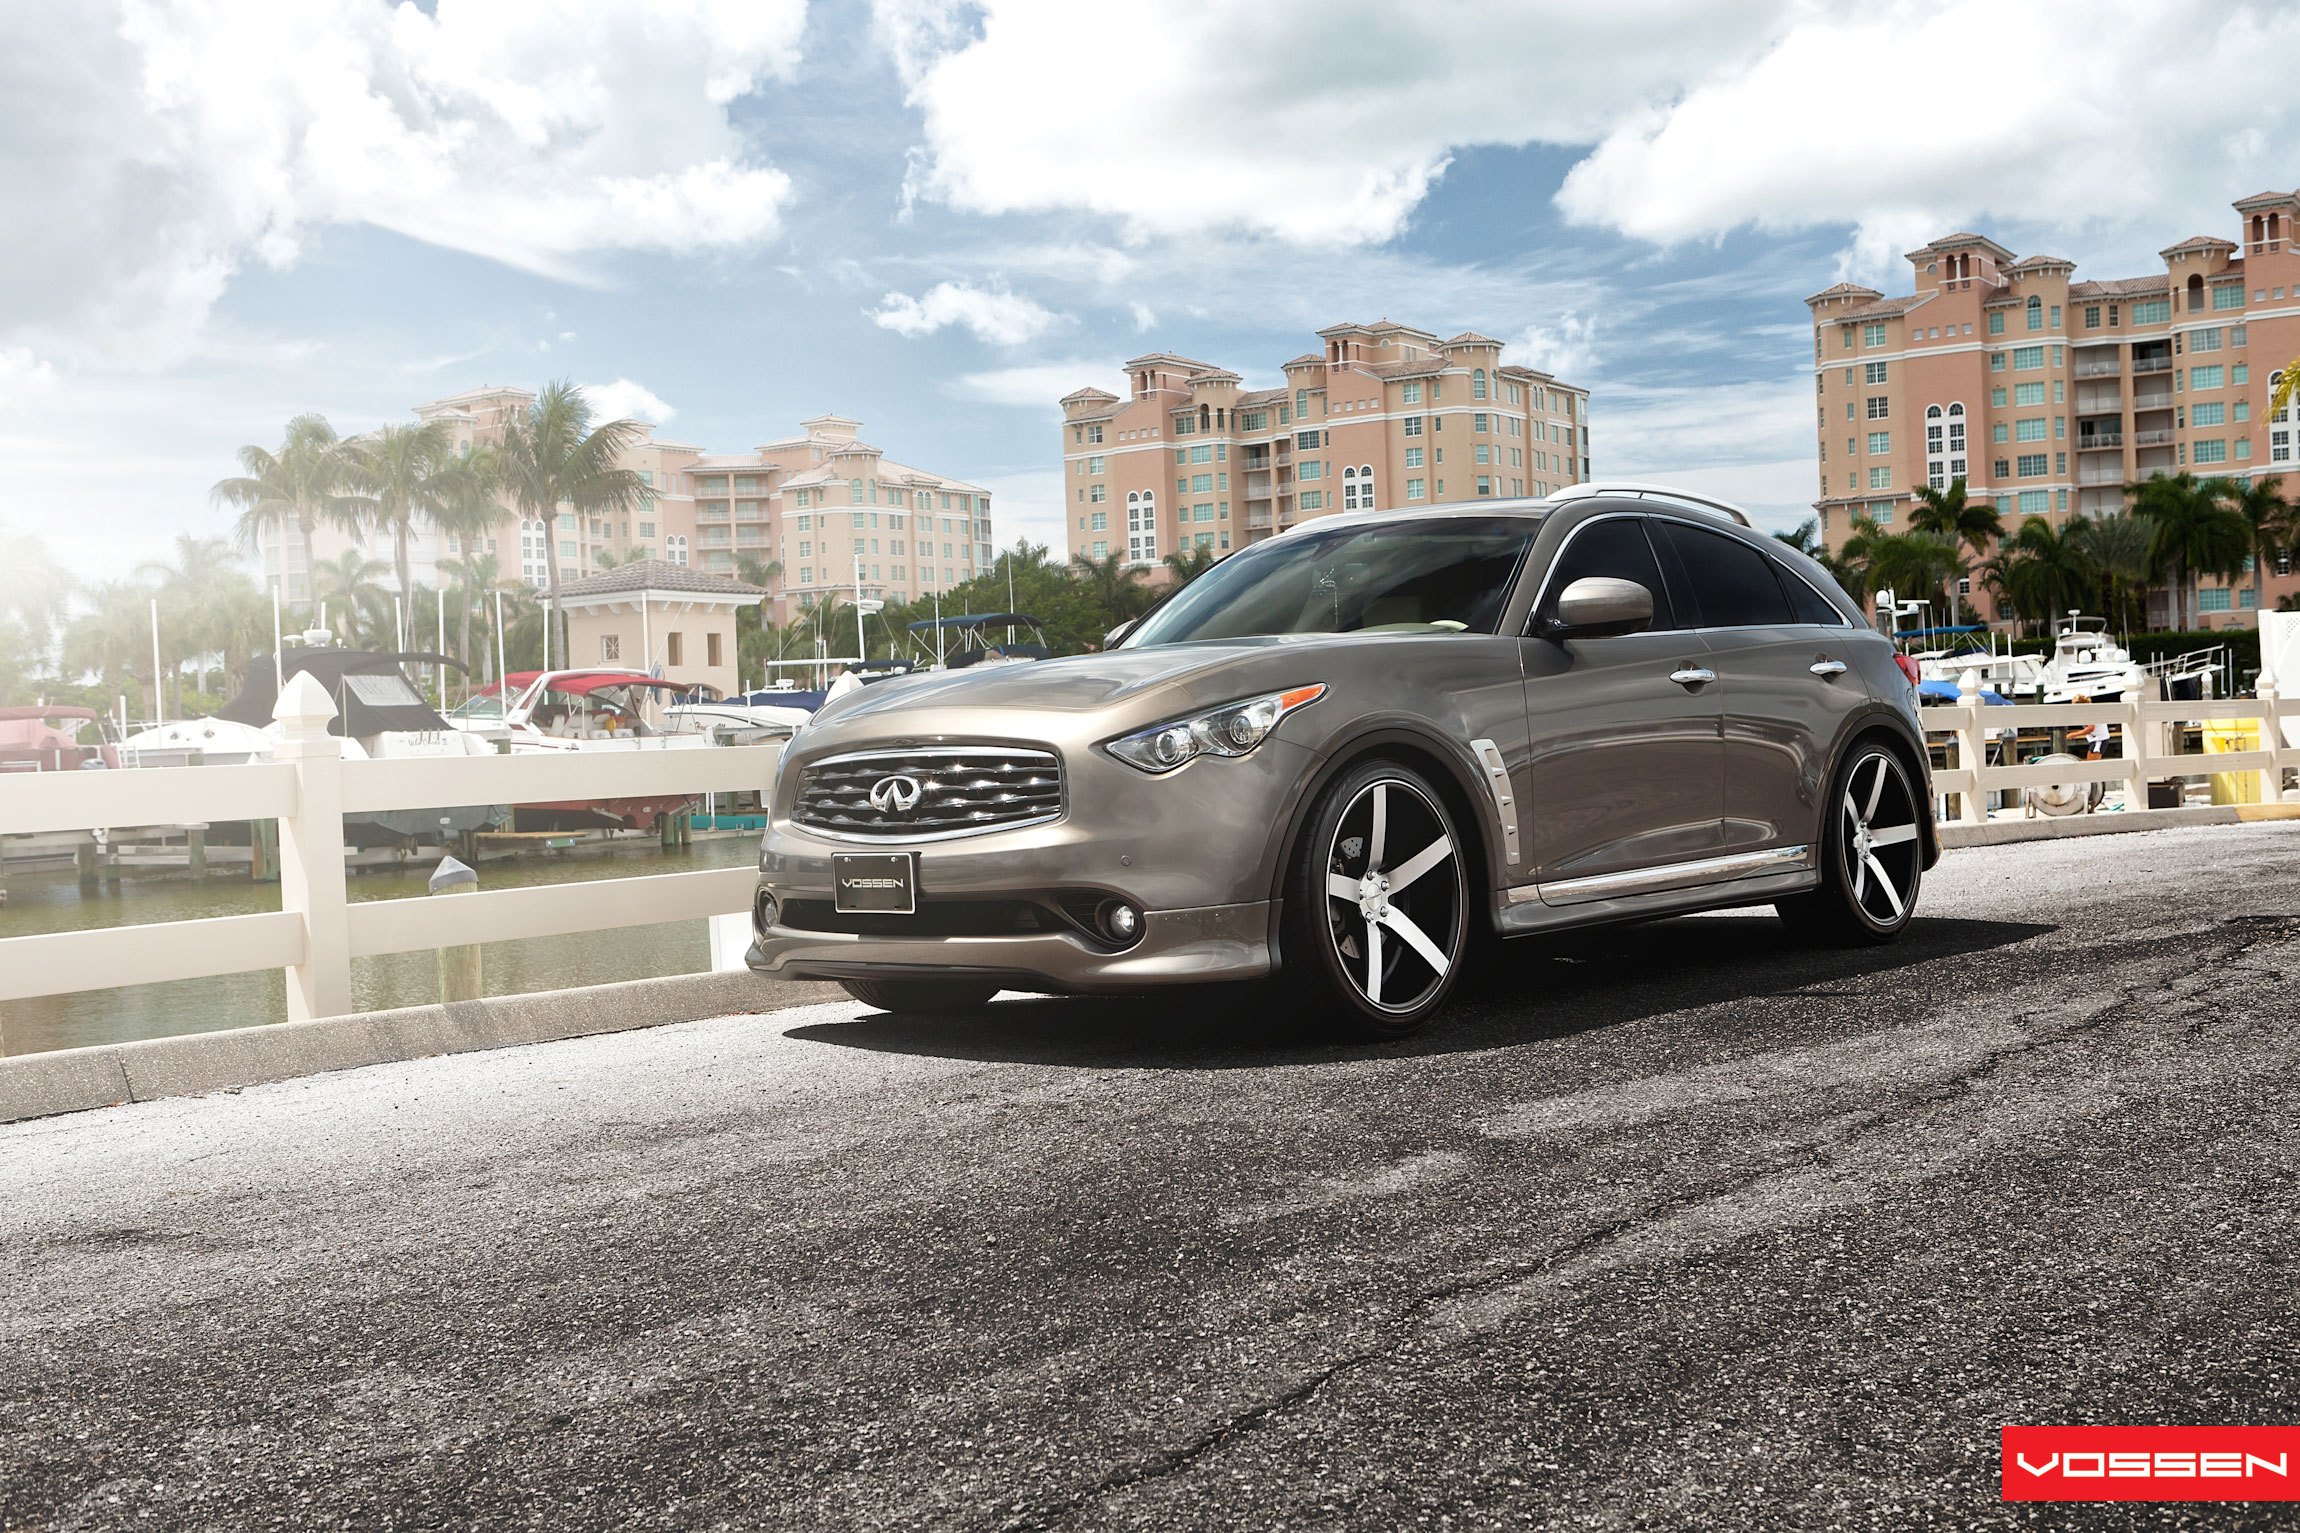 Gray Metallic Infiniti FX35 with Chrome Grille - Photo by Vossen